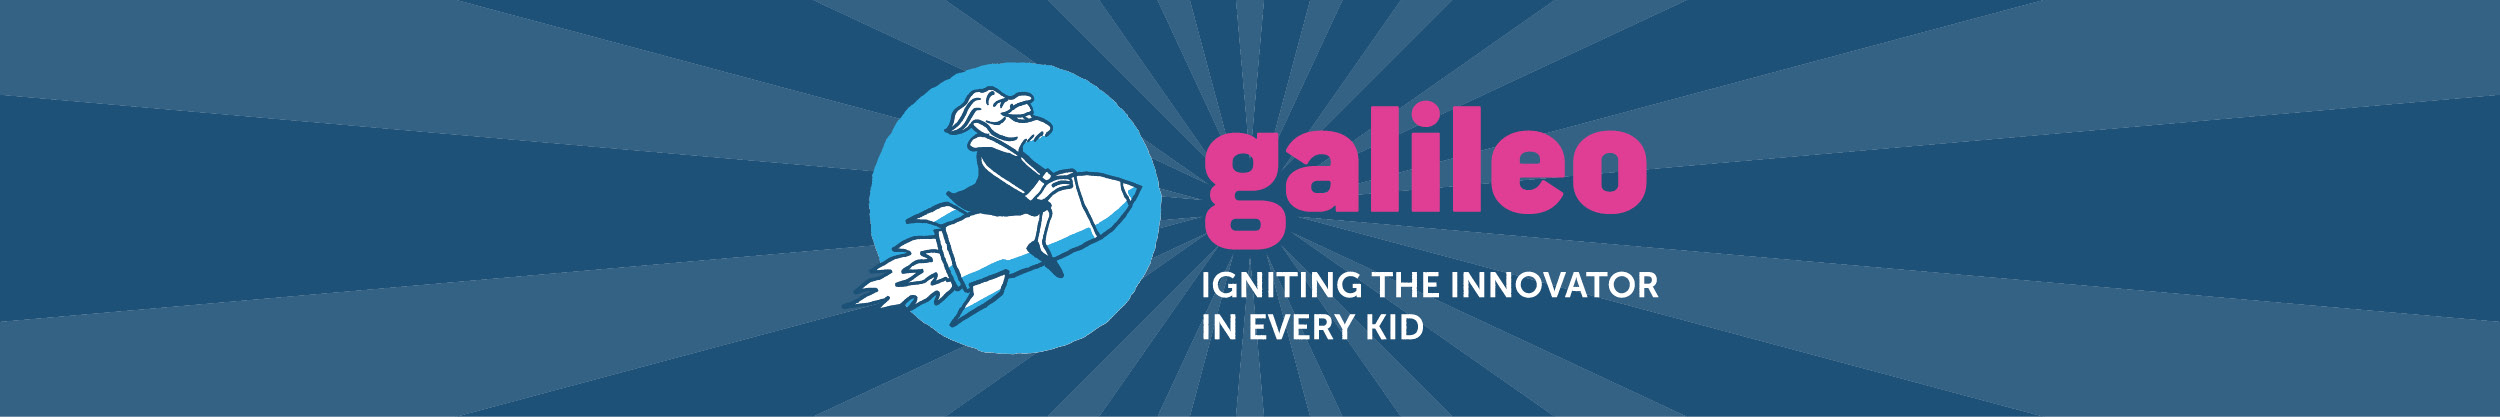 Galileo, Igniting the Innovator in Every Kid